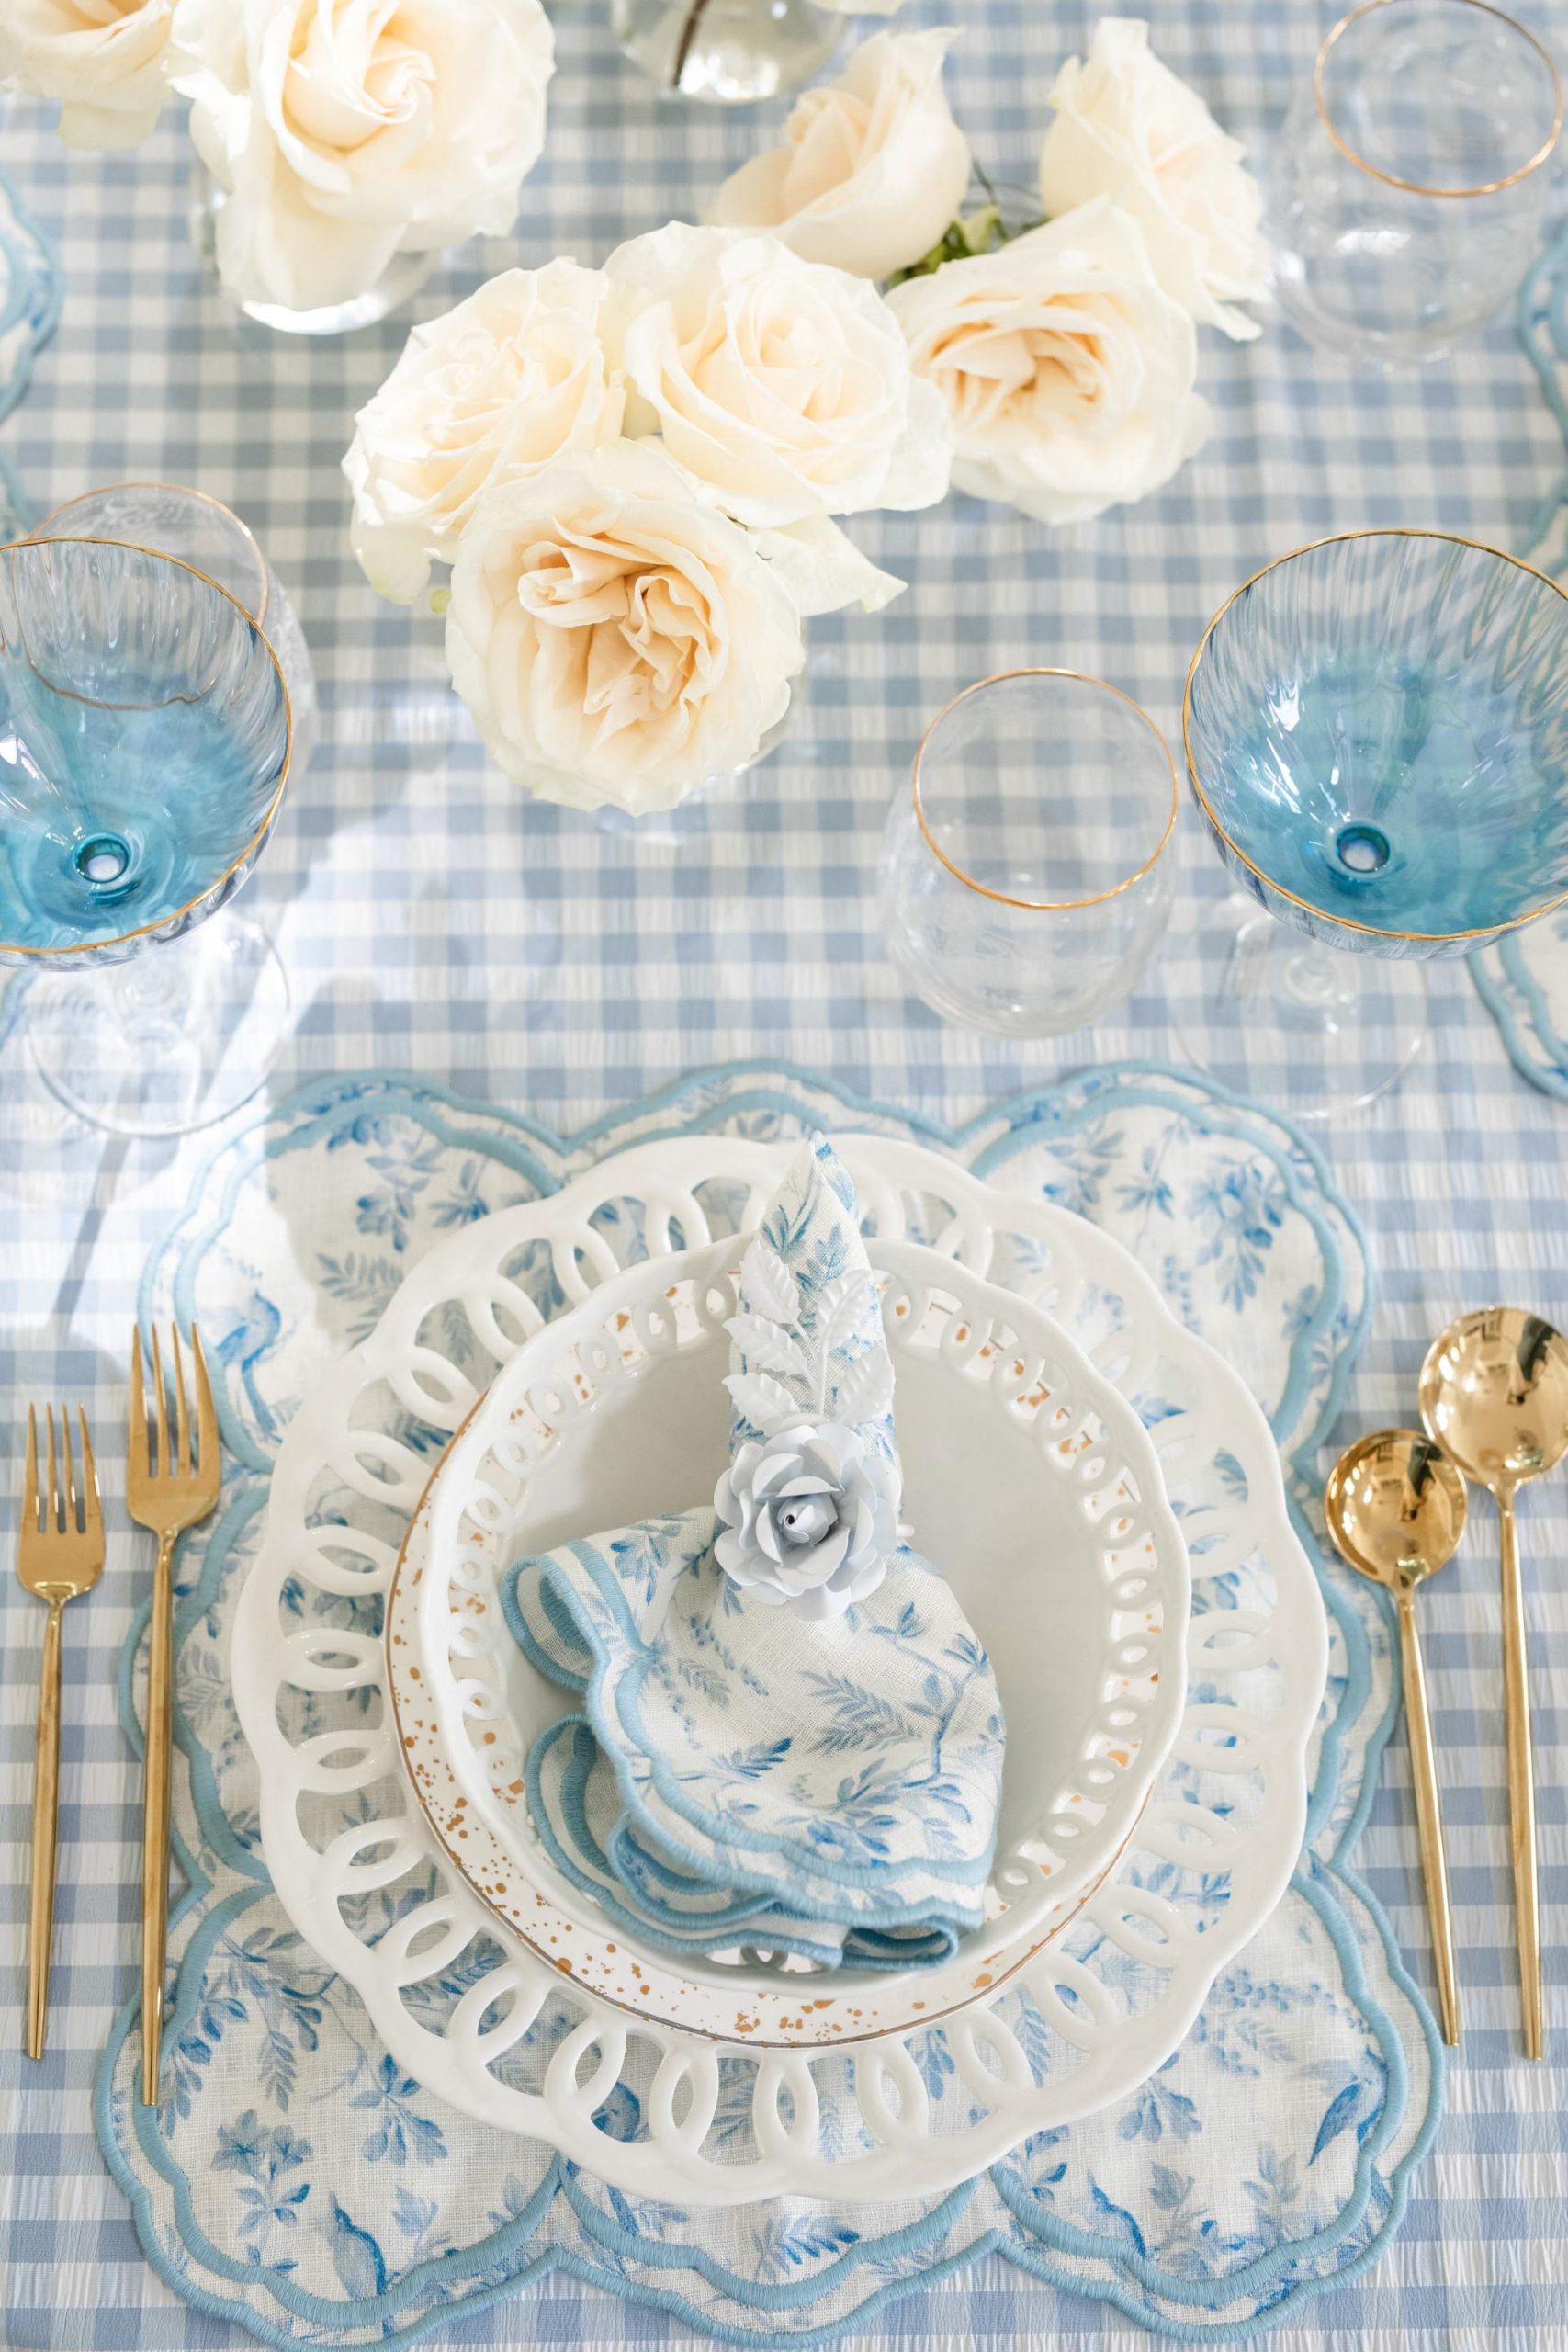 Grand millennial Easter table scape ideas for entertaining. Grandmillential table décor. Blue and gold décor. Veronica Levy, Lombard & Fifth.